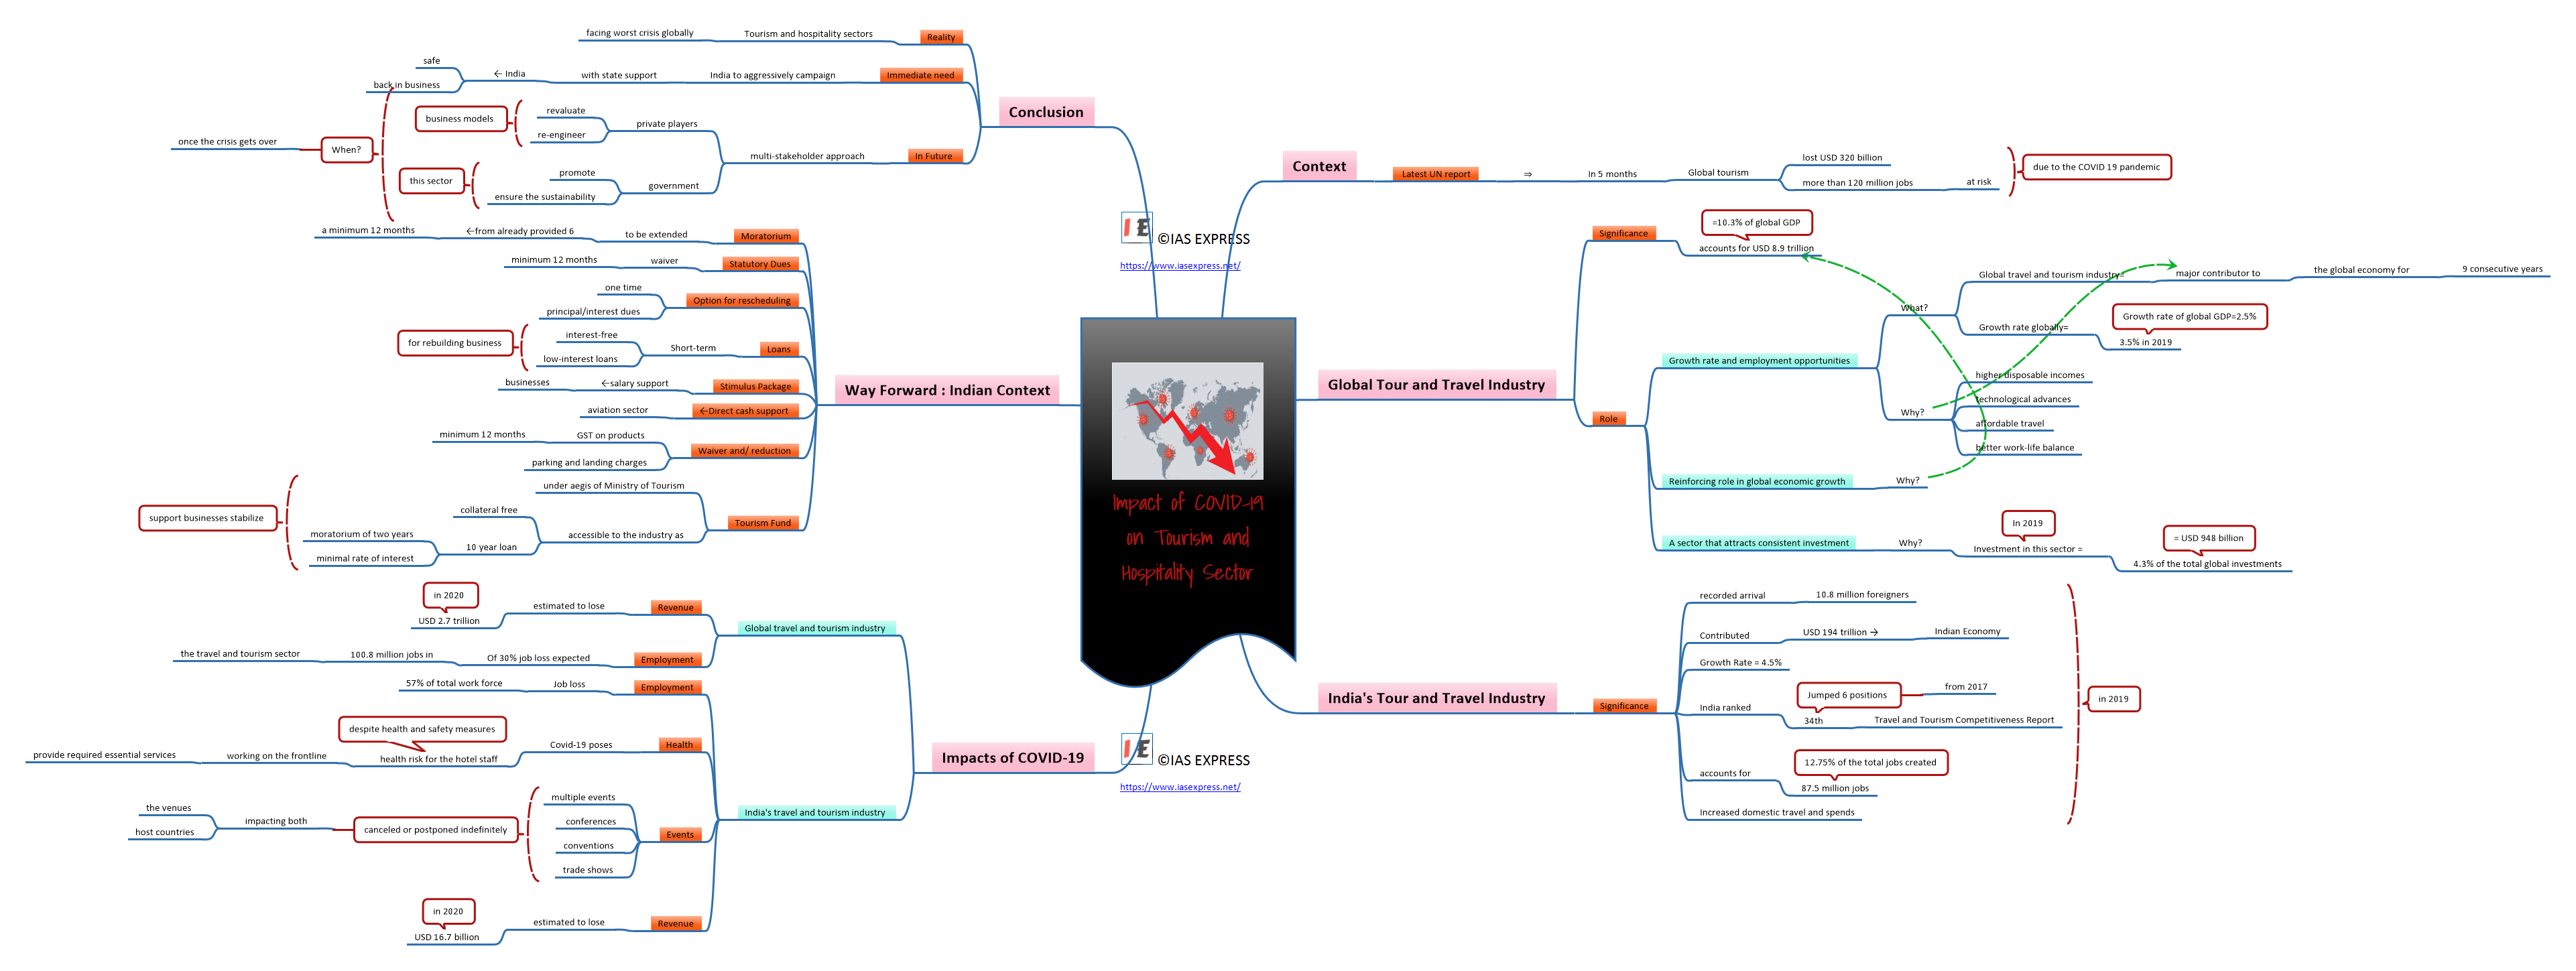 Mind map of Impact of COVID-19 on Tourism and Hospitality Sector